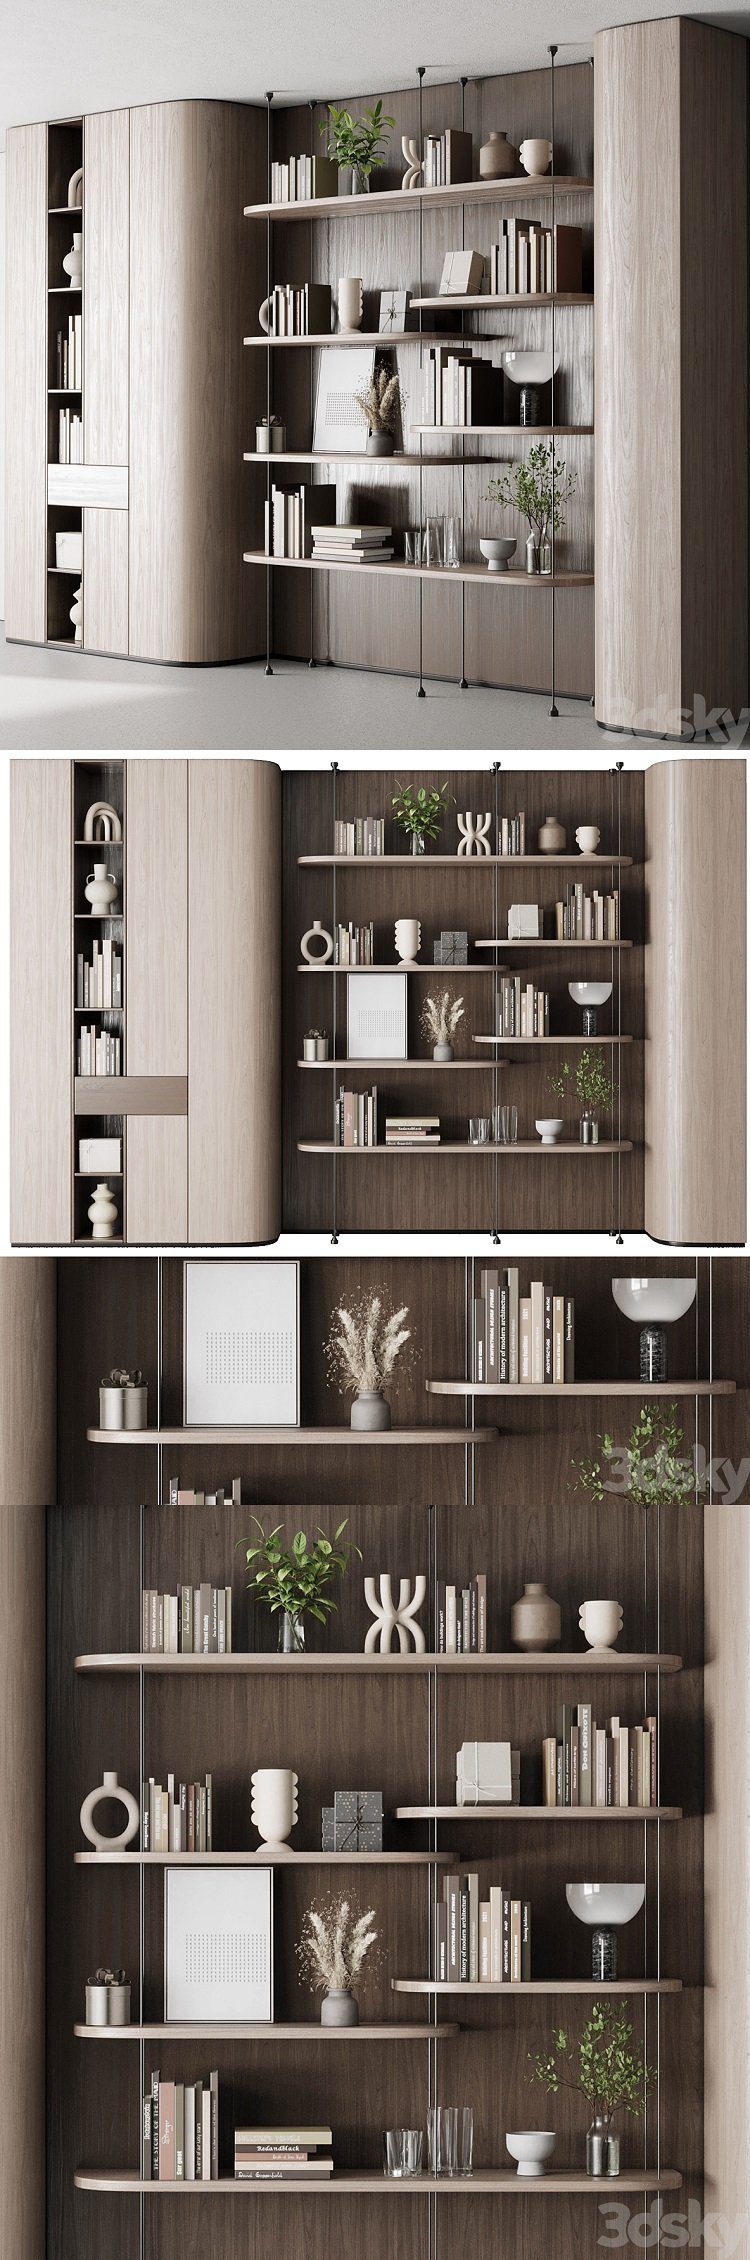 3dsky - Cabinet Furniture - Wooden Shelves Decorative With Plants and Book 06 5776707